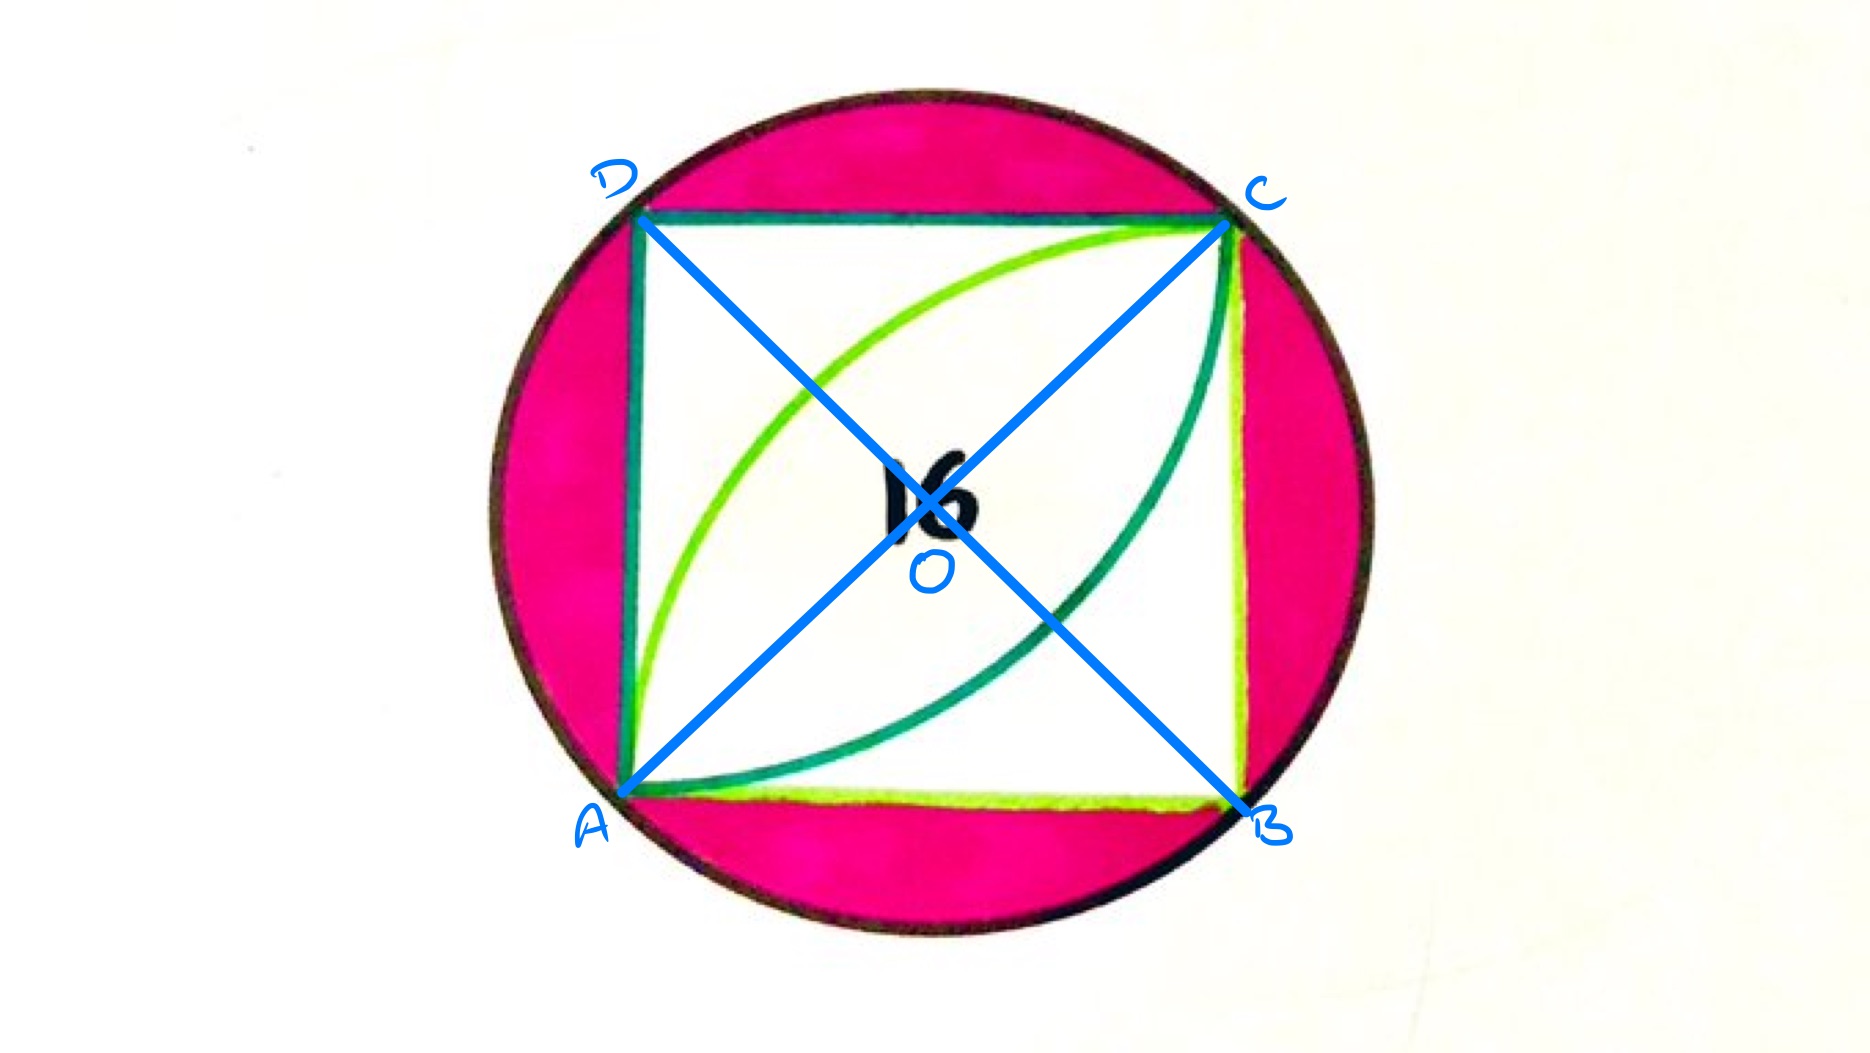 Quarter circles in a square in a circle labelled